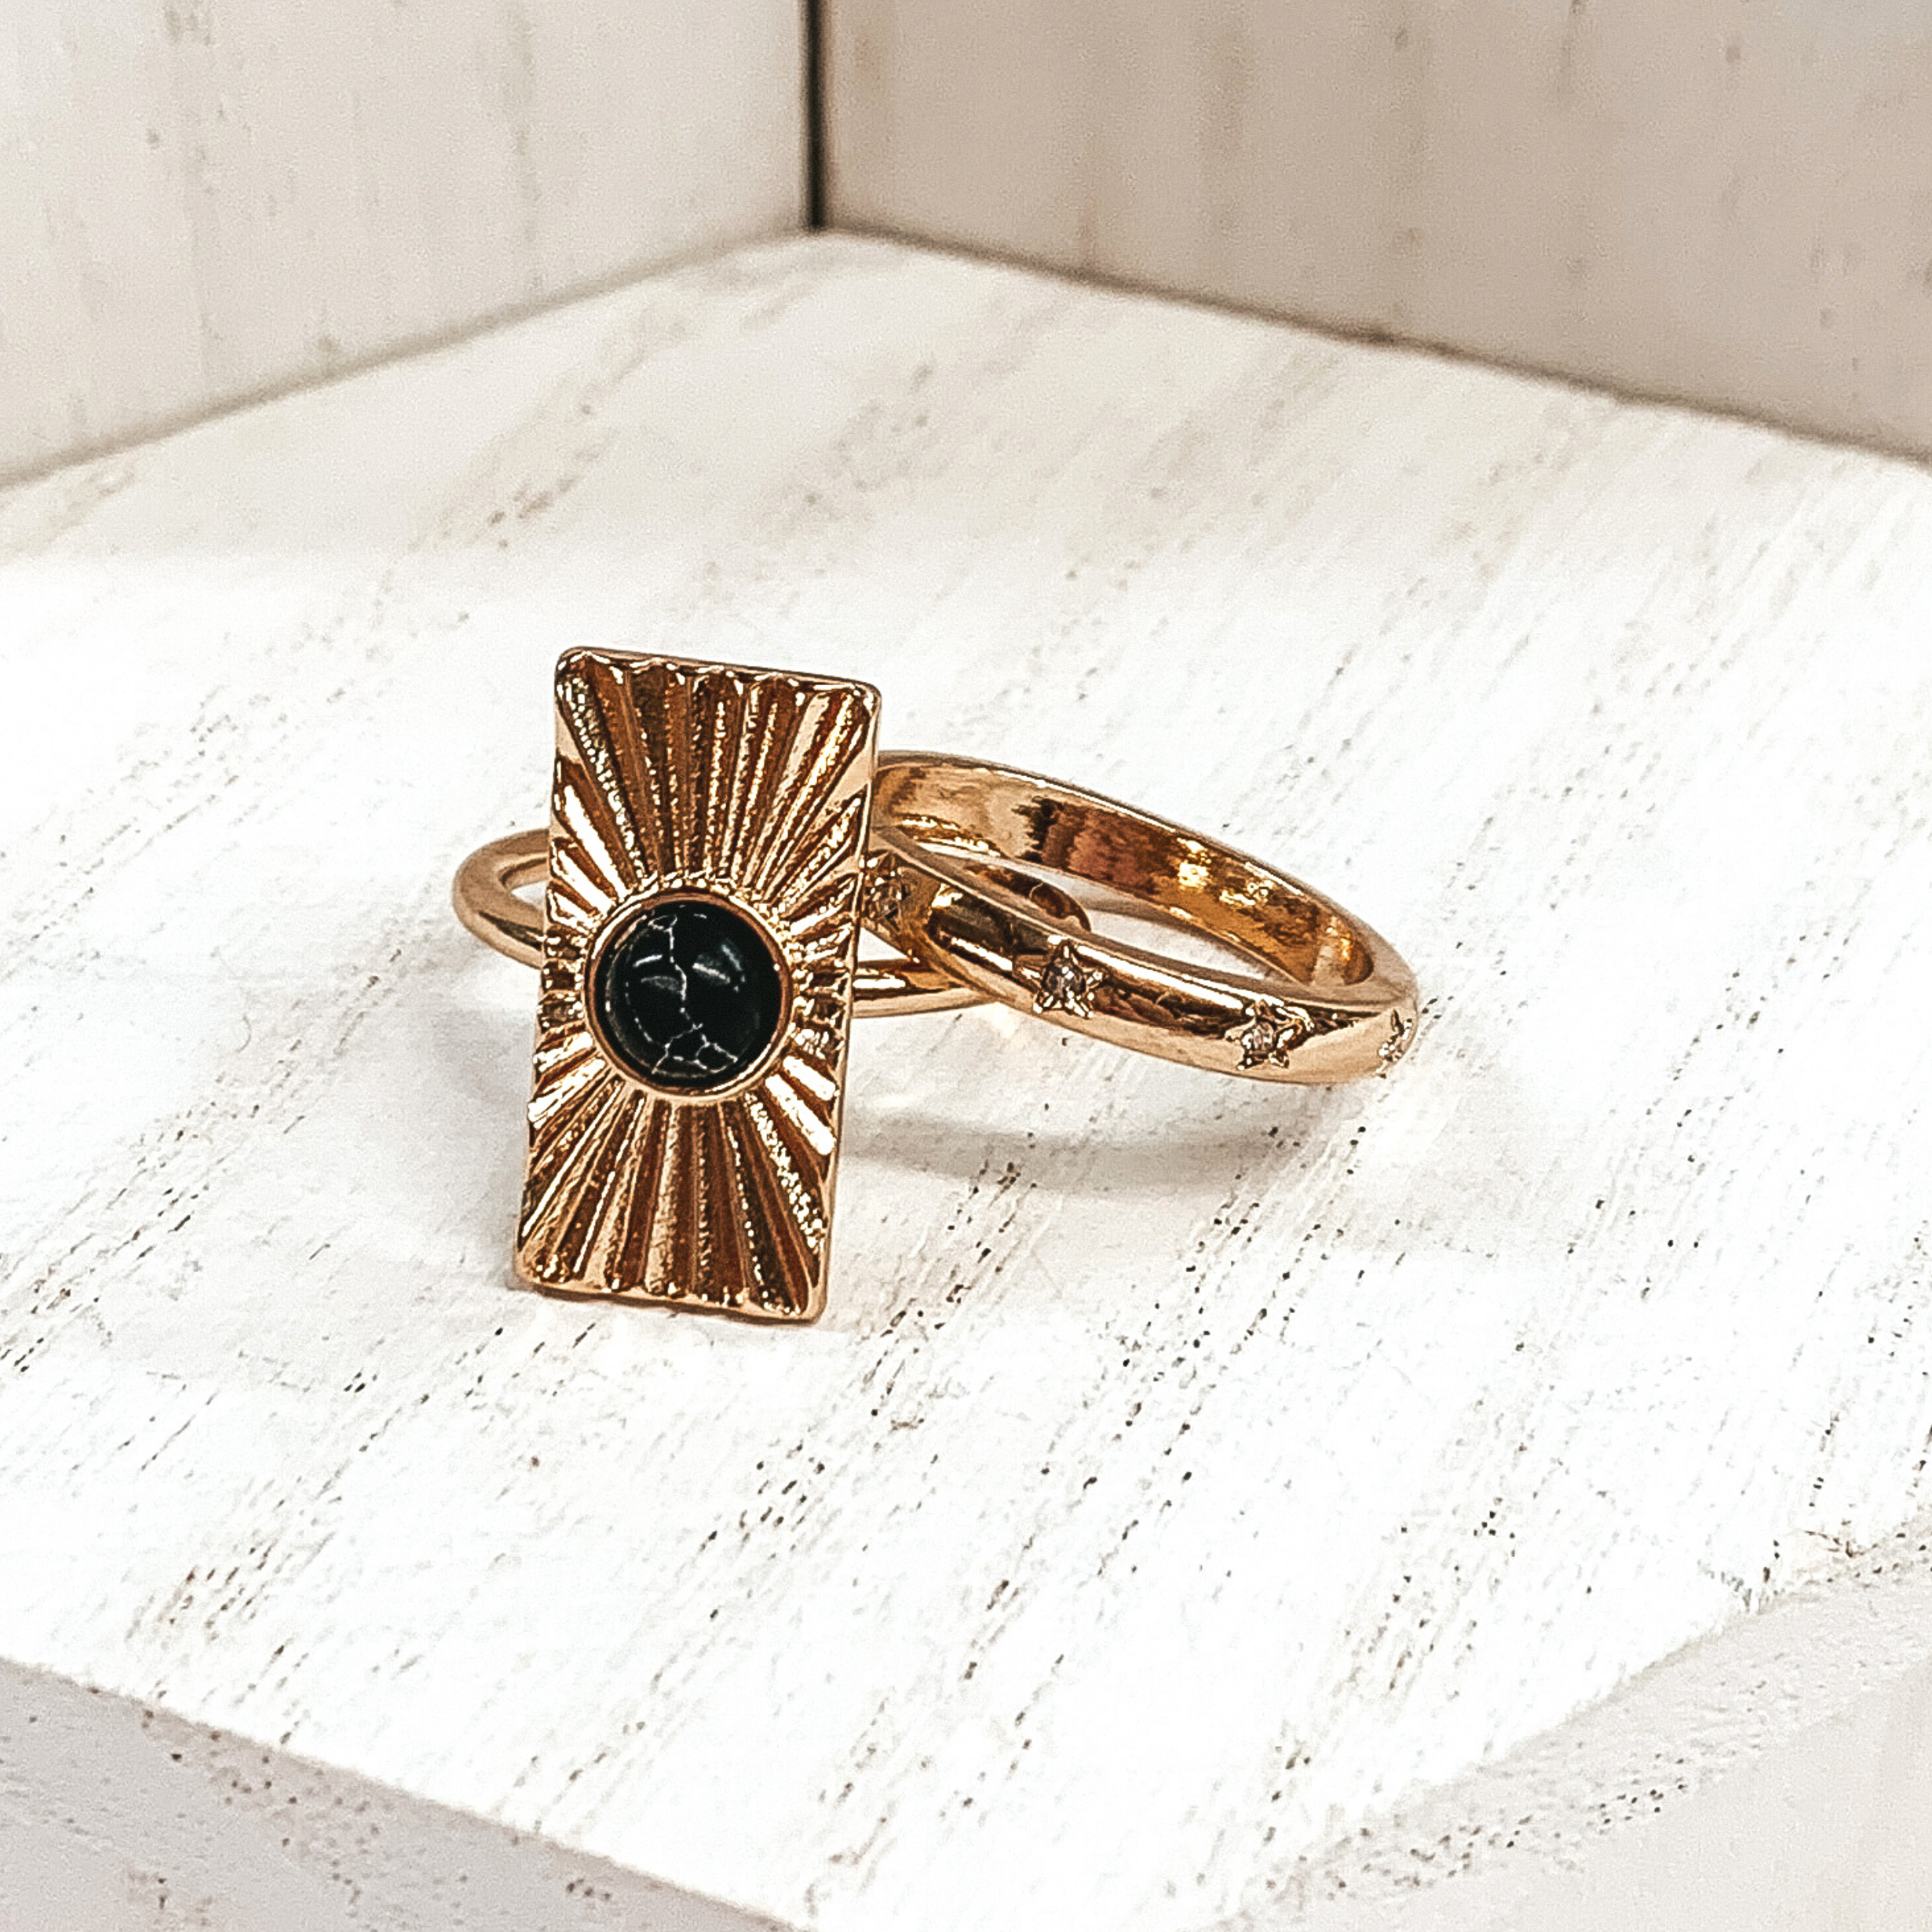 Both rings are gold in color. The first ring has an rectangle pendant with a starburst design on it and a center black stone. The second ring has tiny engraved stars with clear crystals in the center of them These rings are pictured on a white background.